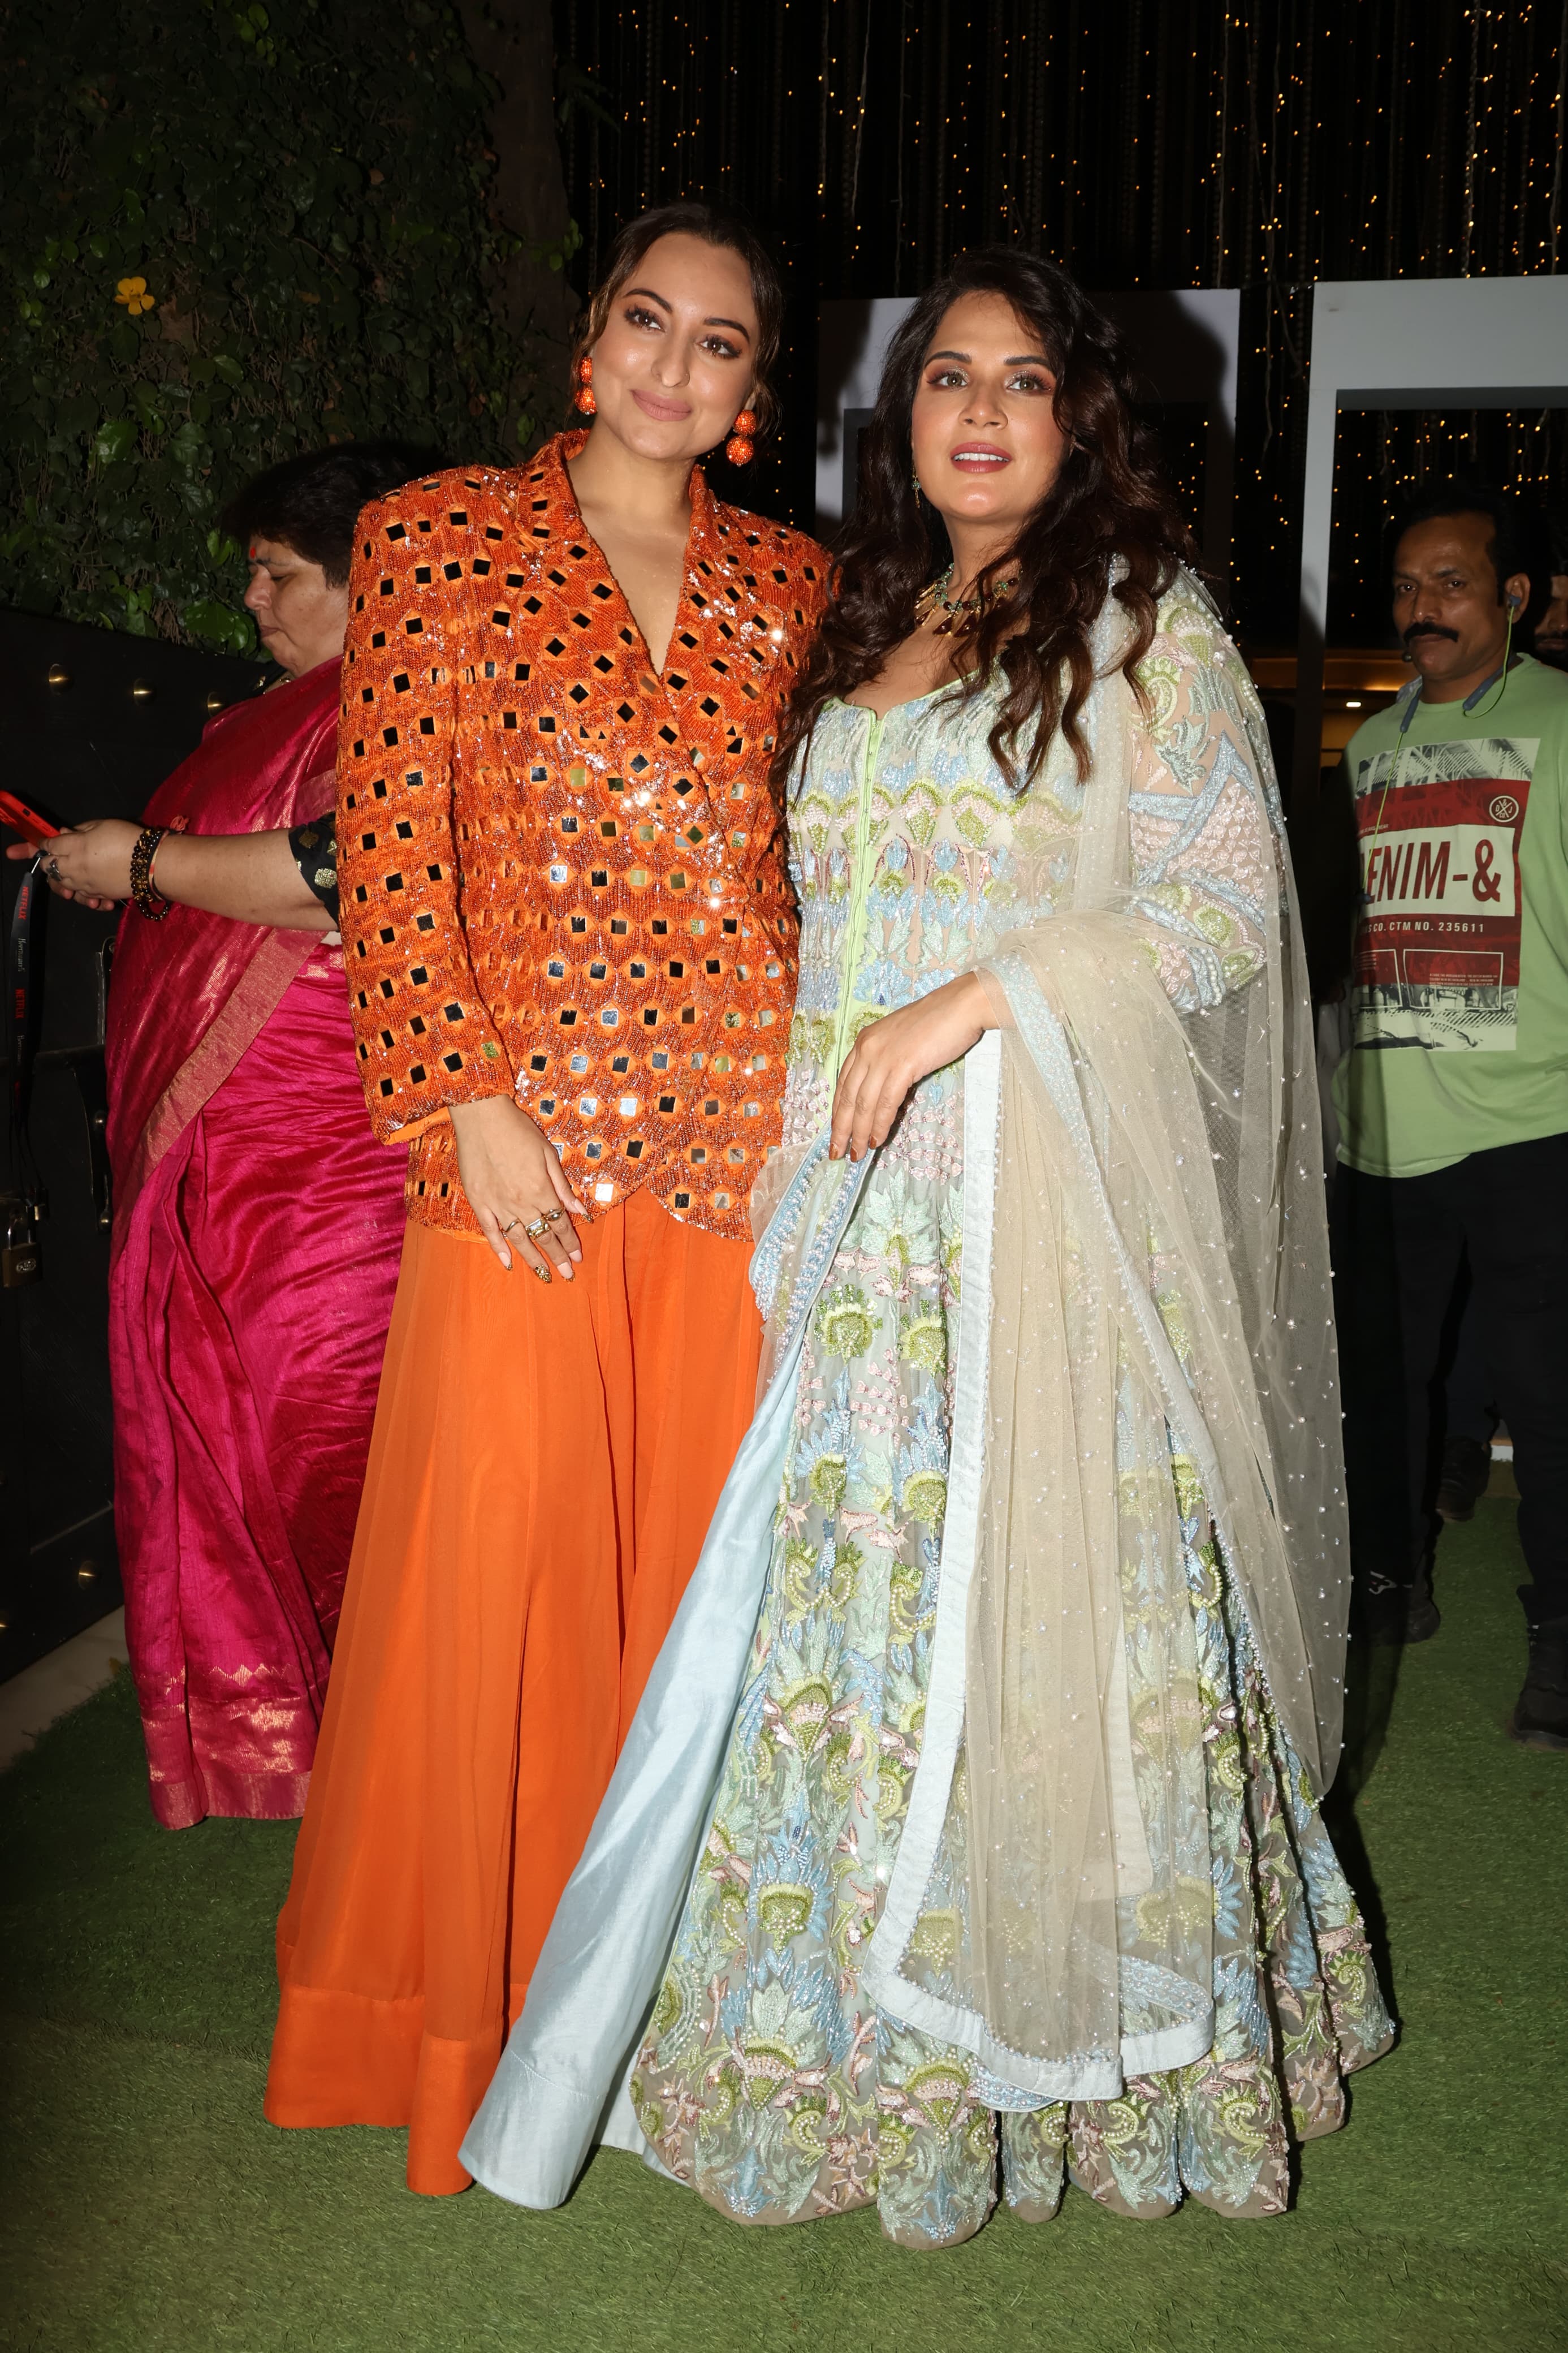 Mom-to-be Richa Chadha aced in sea blue lehenga while Sonakshi Sinha stunned in orange as they attended the Heeramandi release date announcement event